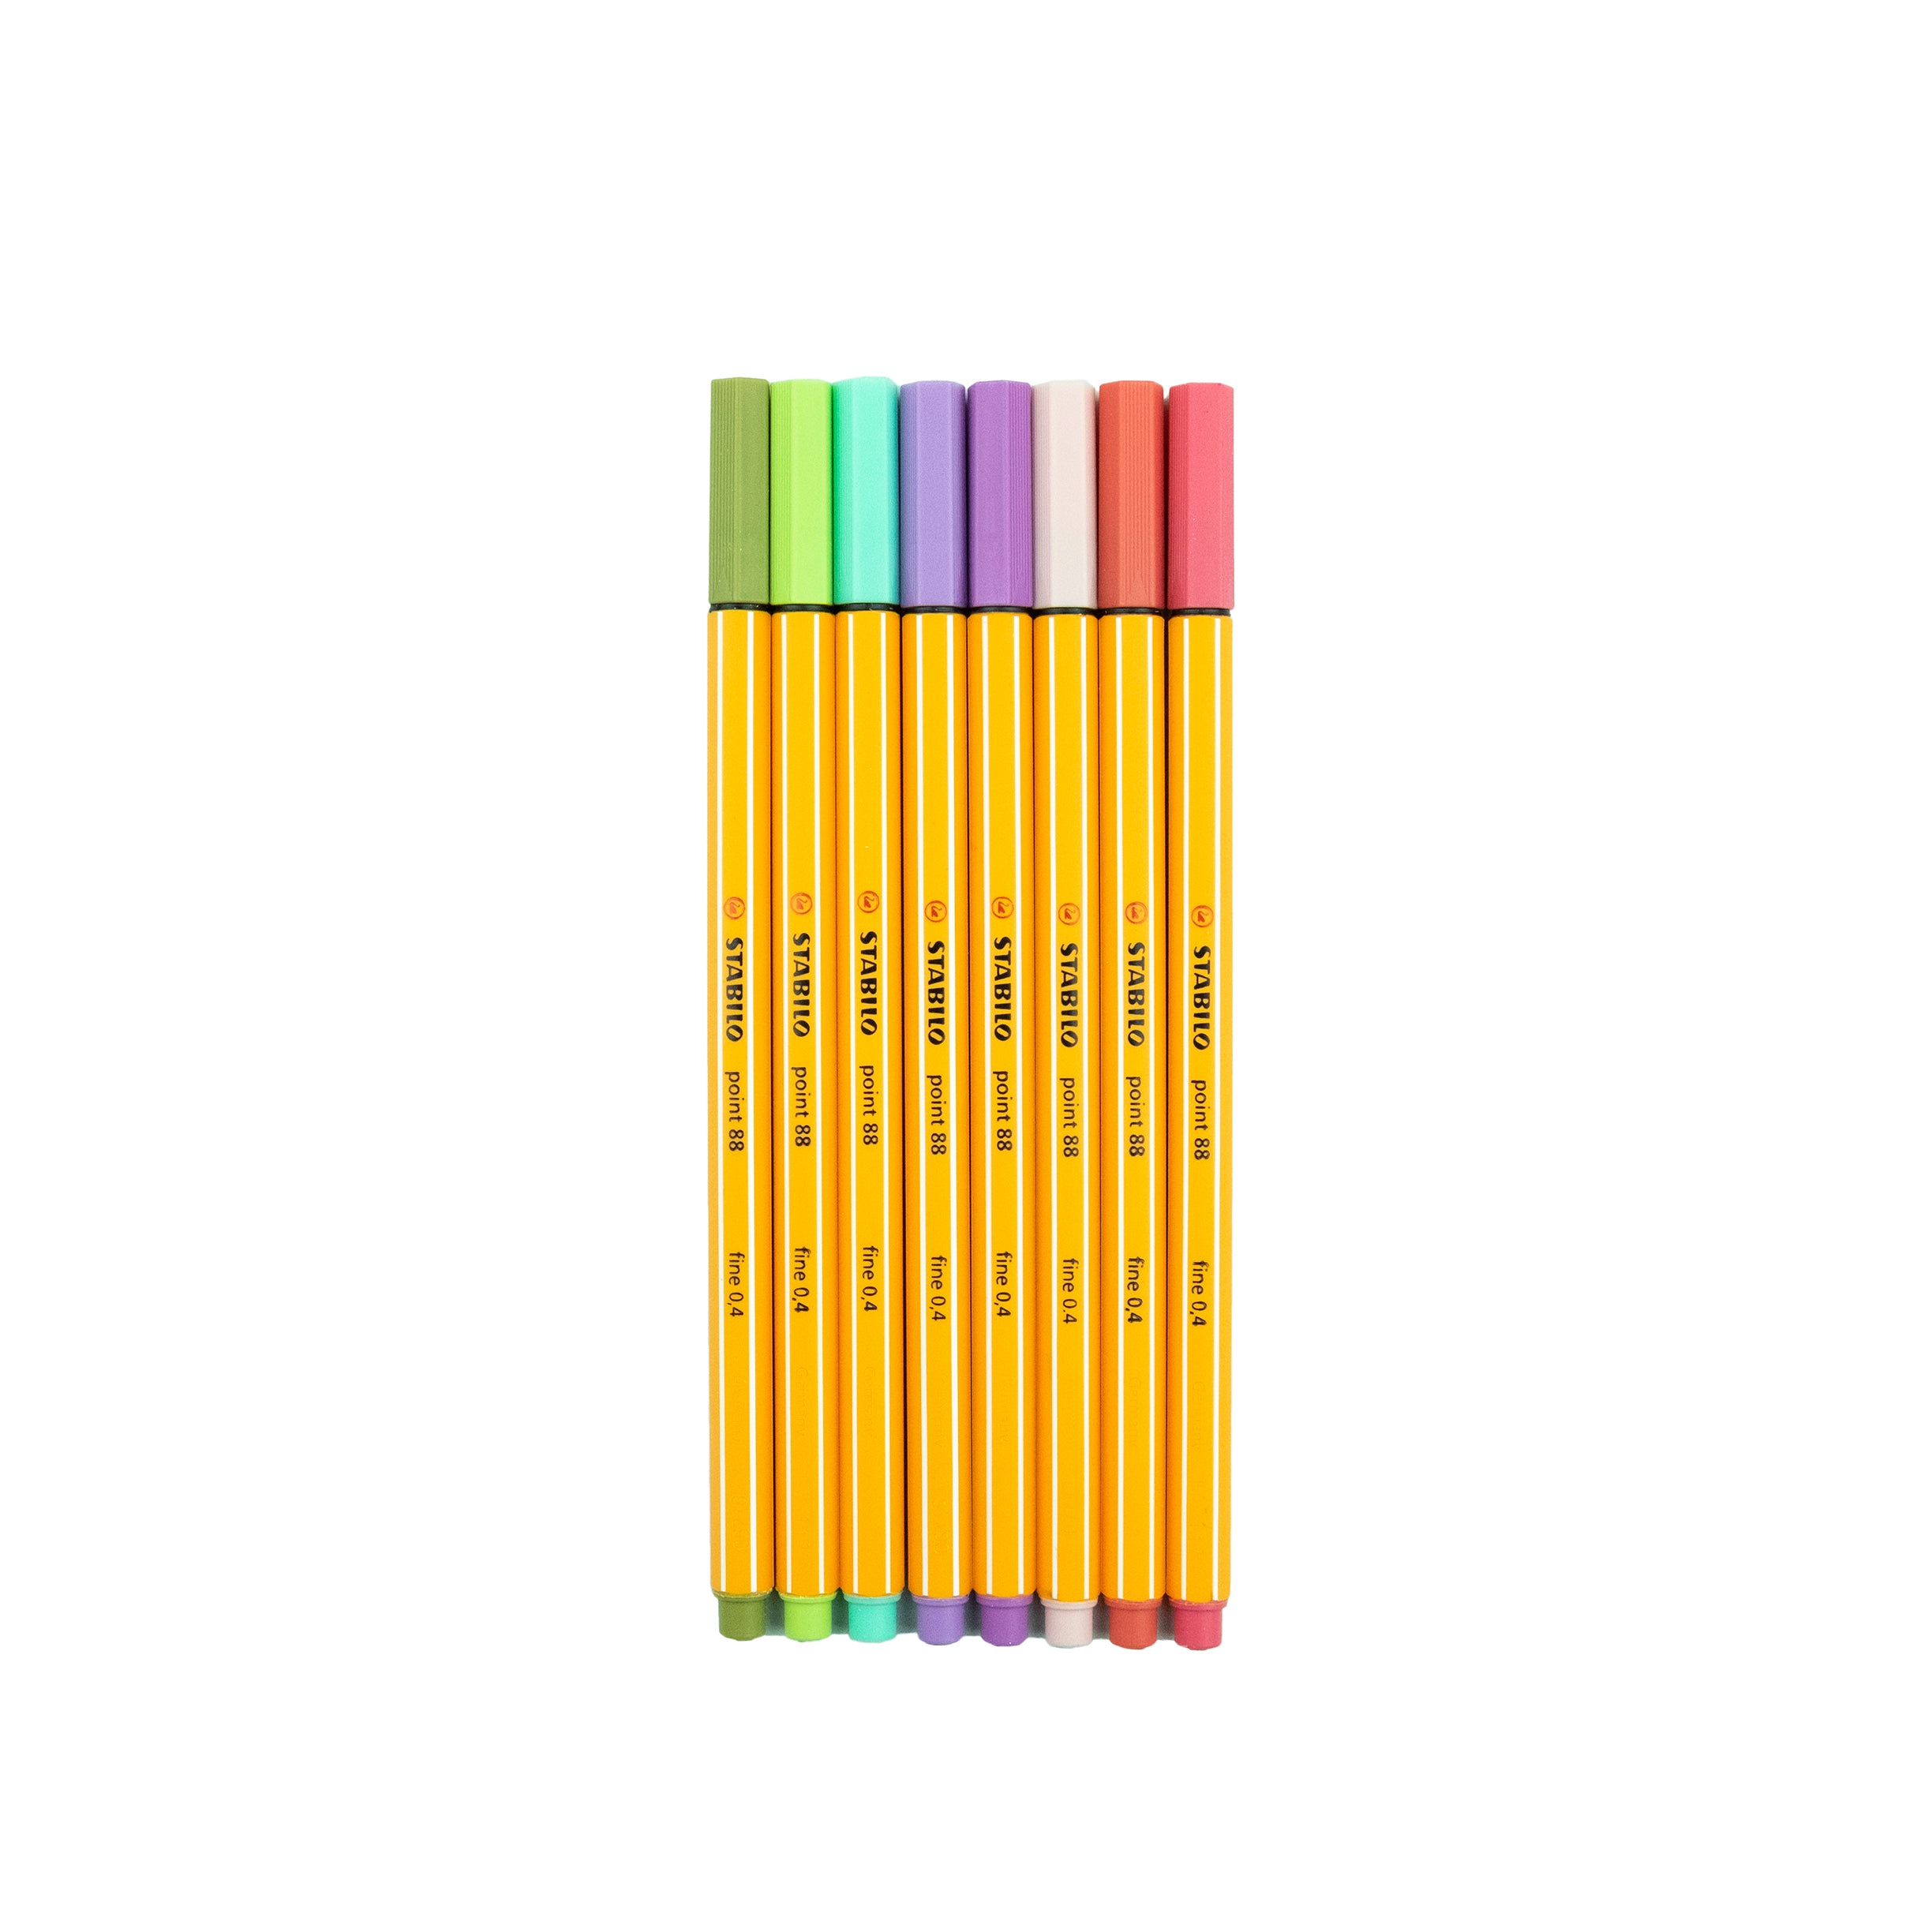 Stabilo Point 88 Fineliners, Muted Colors Set of 8 — ArtSnacks